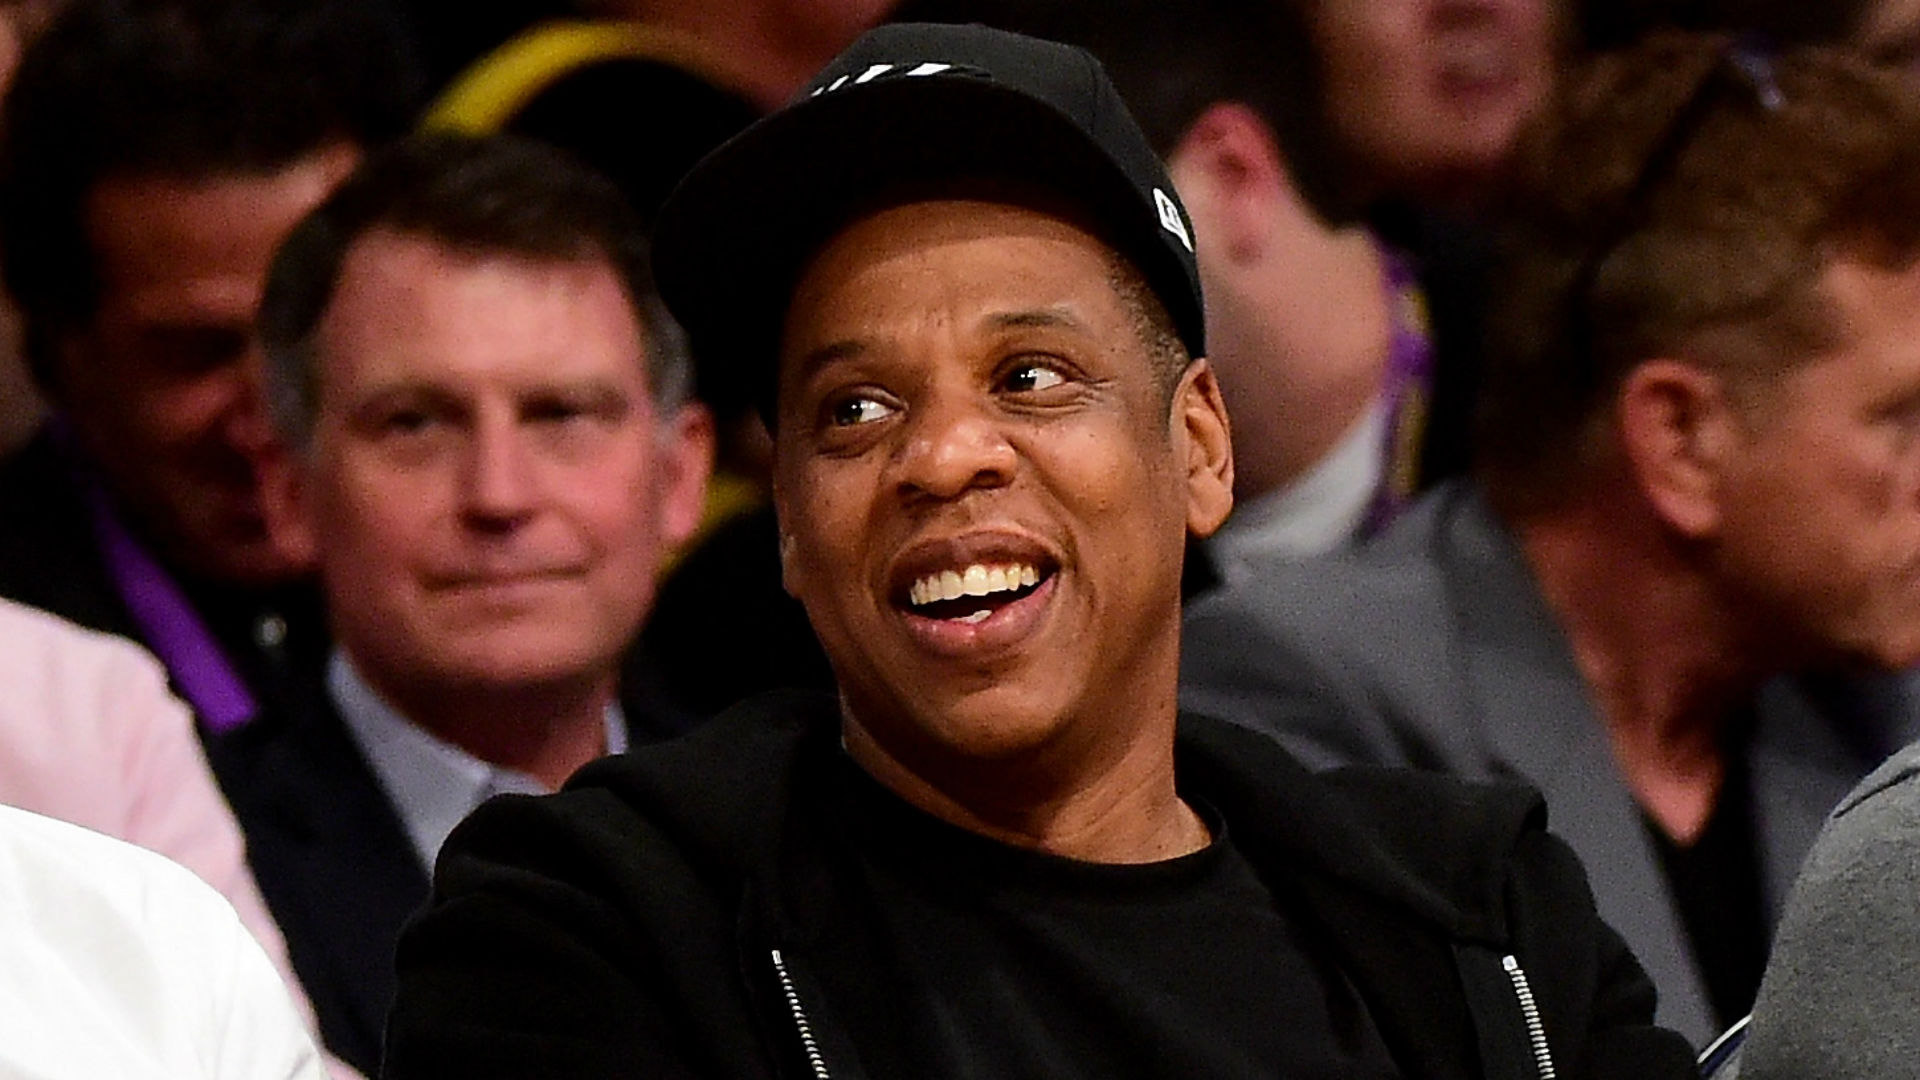 The NFL is establishing a social justice partnership with Roc Nation, Jay-Z's entertainment company.